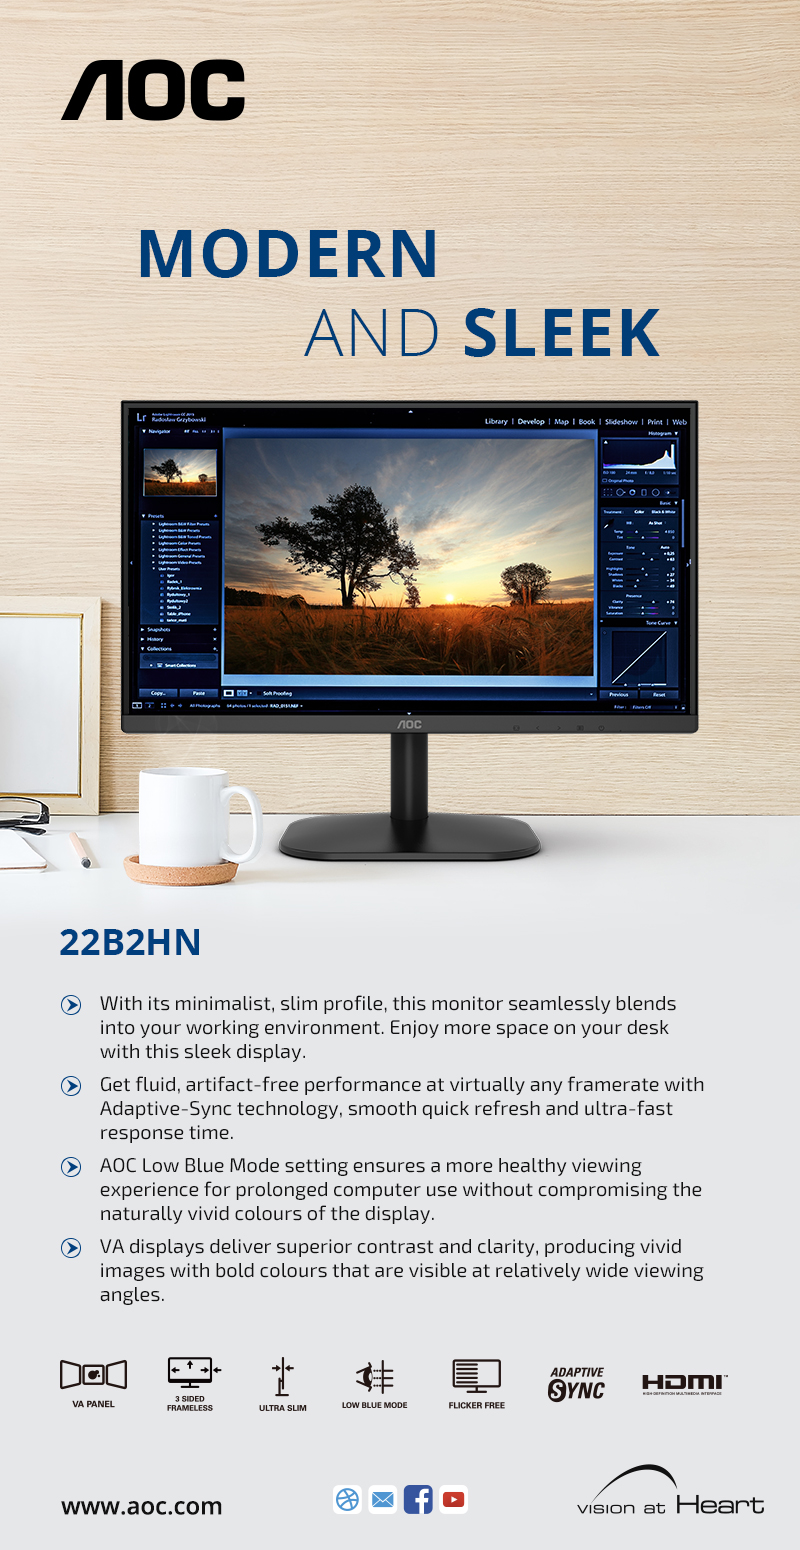 A large marketing image providing additional information about the product AOC 22B2HN - 21.5" FHD 75Hz VA Monitor - Additional alt info not provided